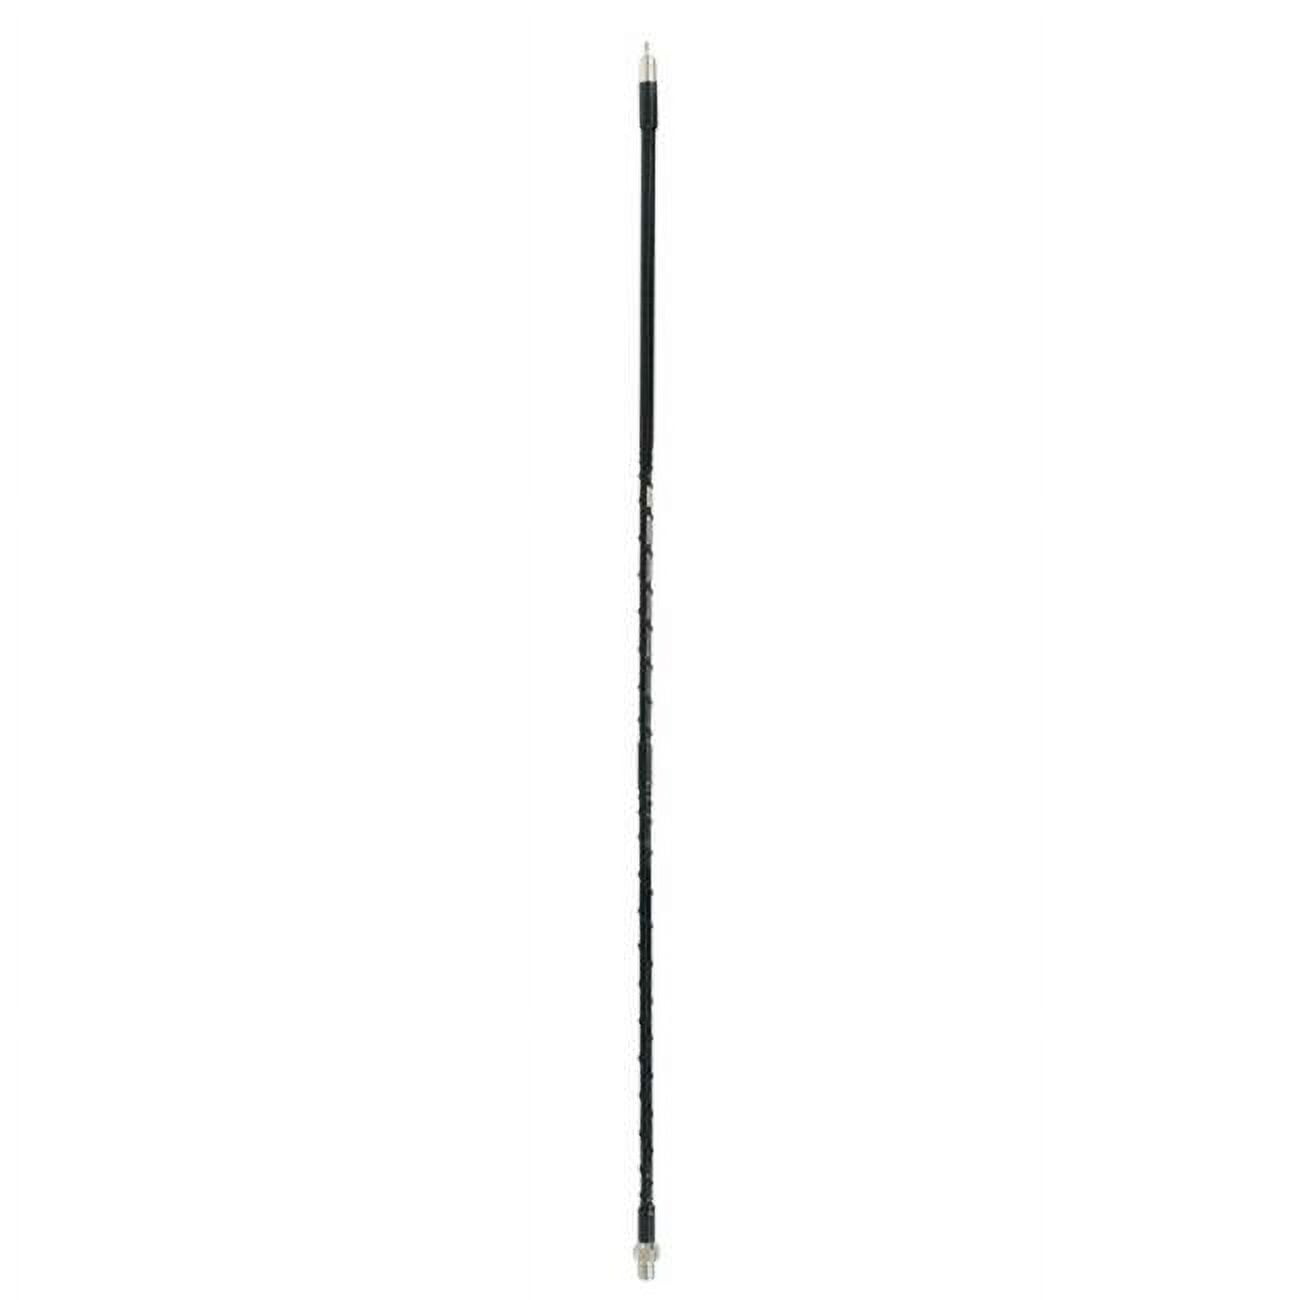 Picture of Accessories Unlimited AUFLEX3-B 0.38 x 24 in. 3 ft. Superflex CB Antenna with Tunable Tip, Black